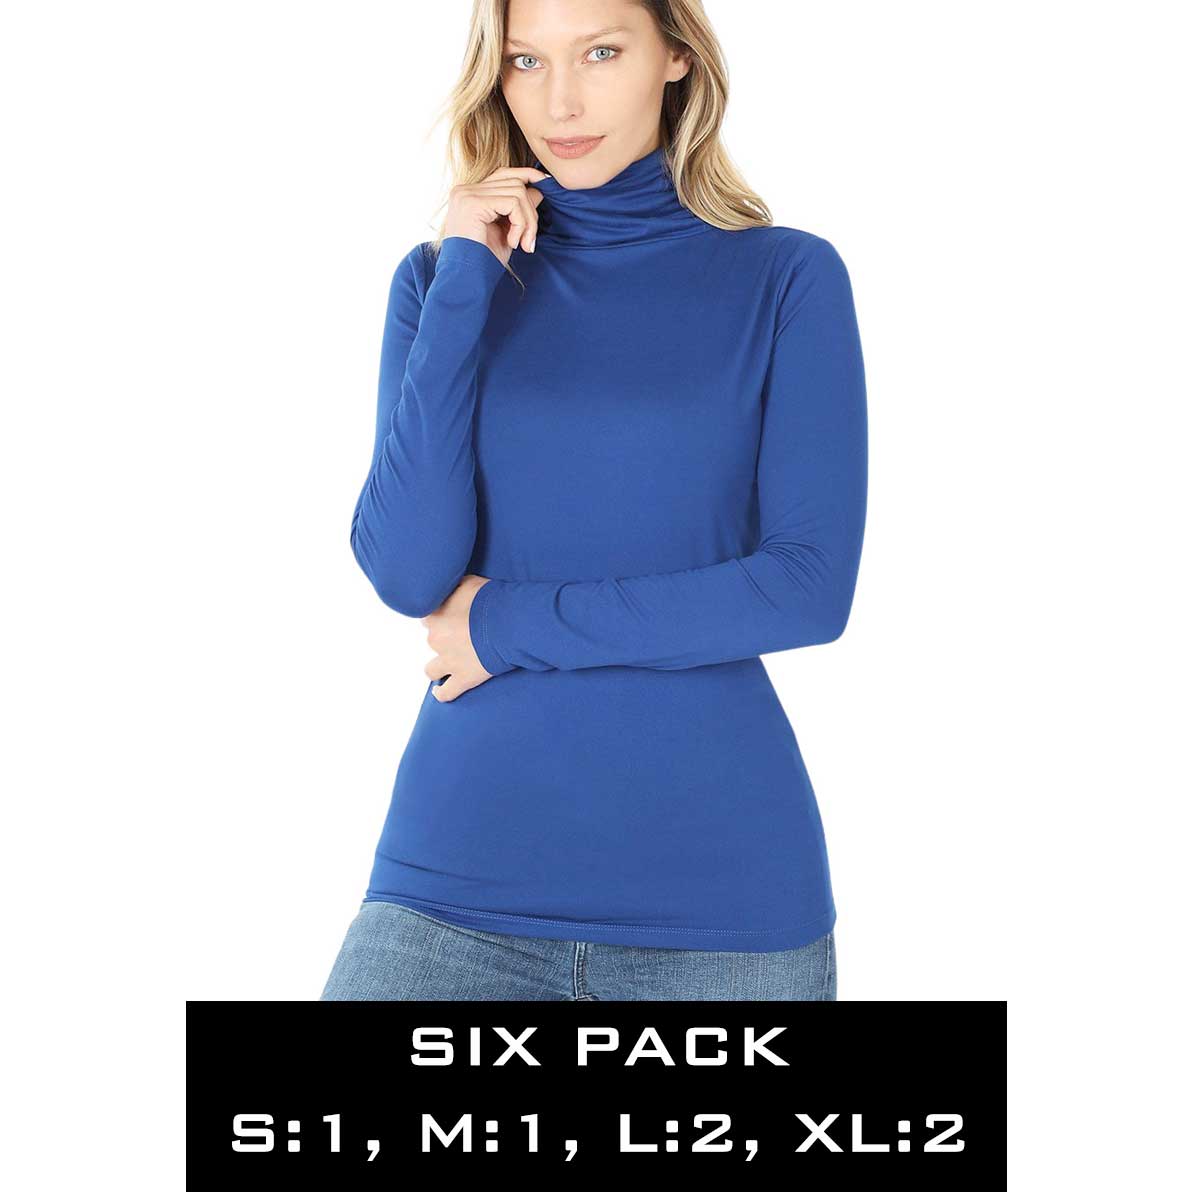  MID-NAVY (SIX PACK) Ruched Turtleneck Long Sleeve 2055(1S,1M,2L,2XL)